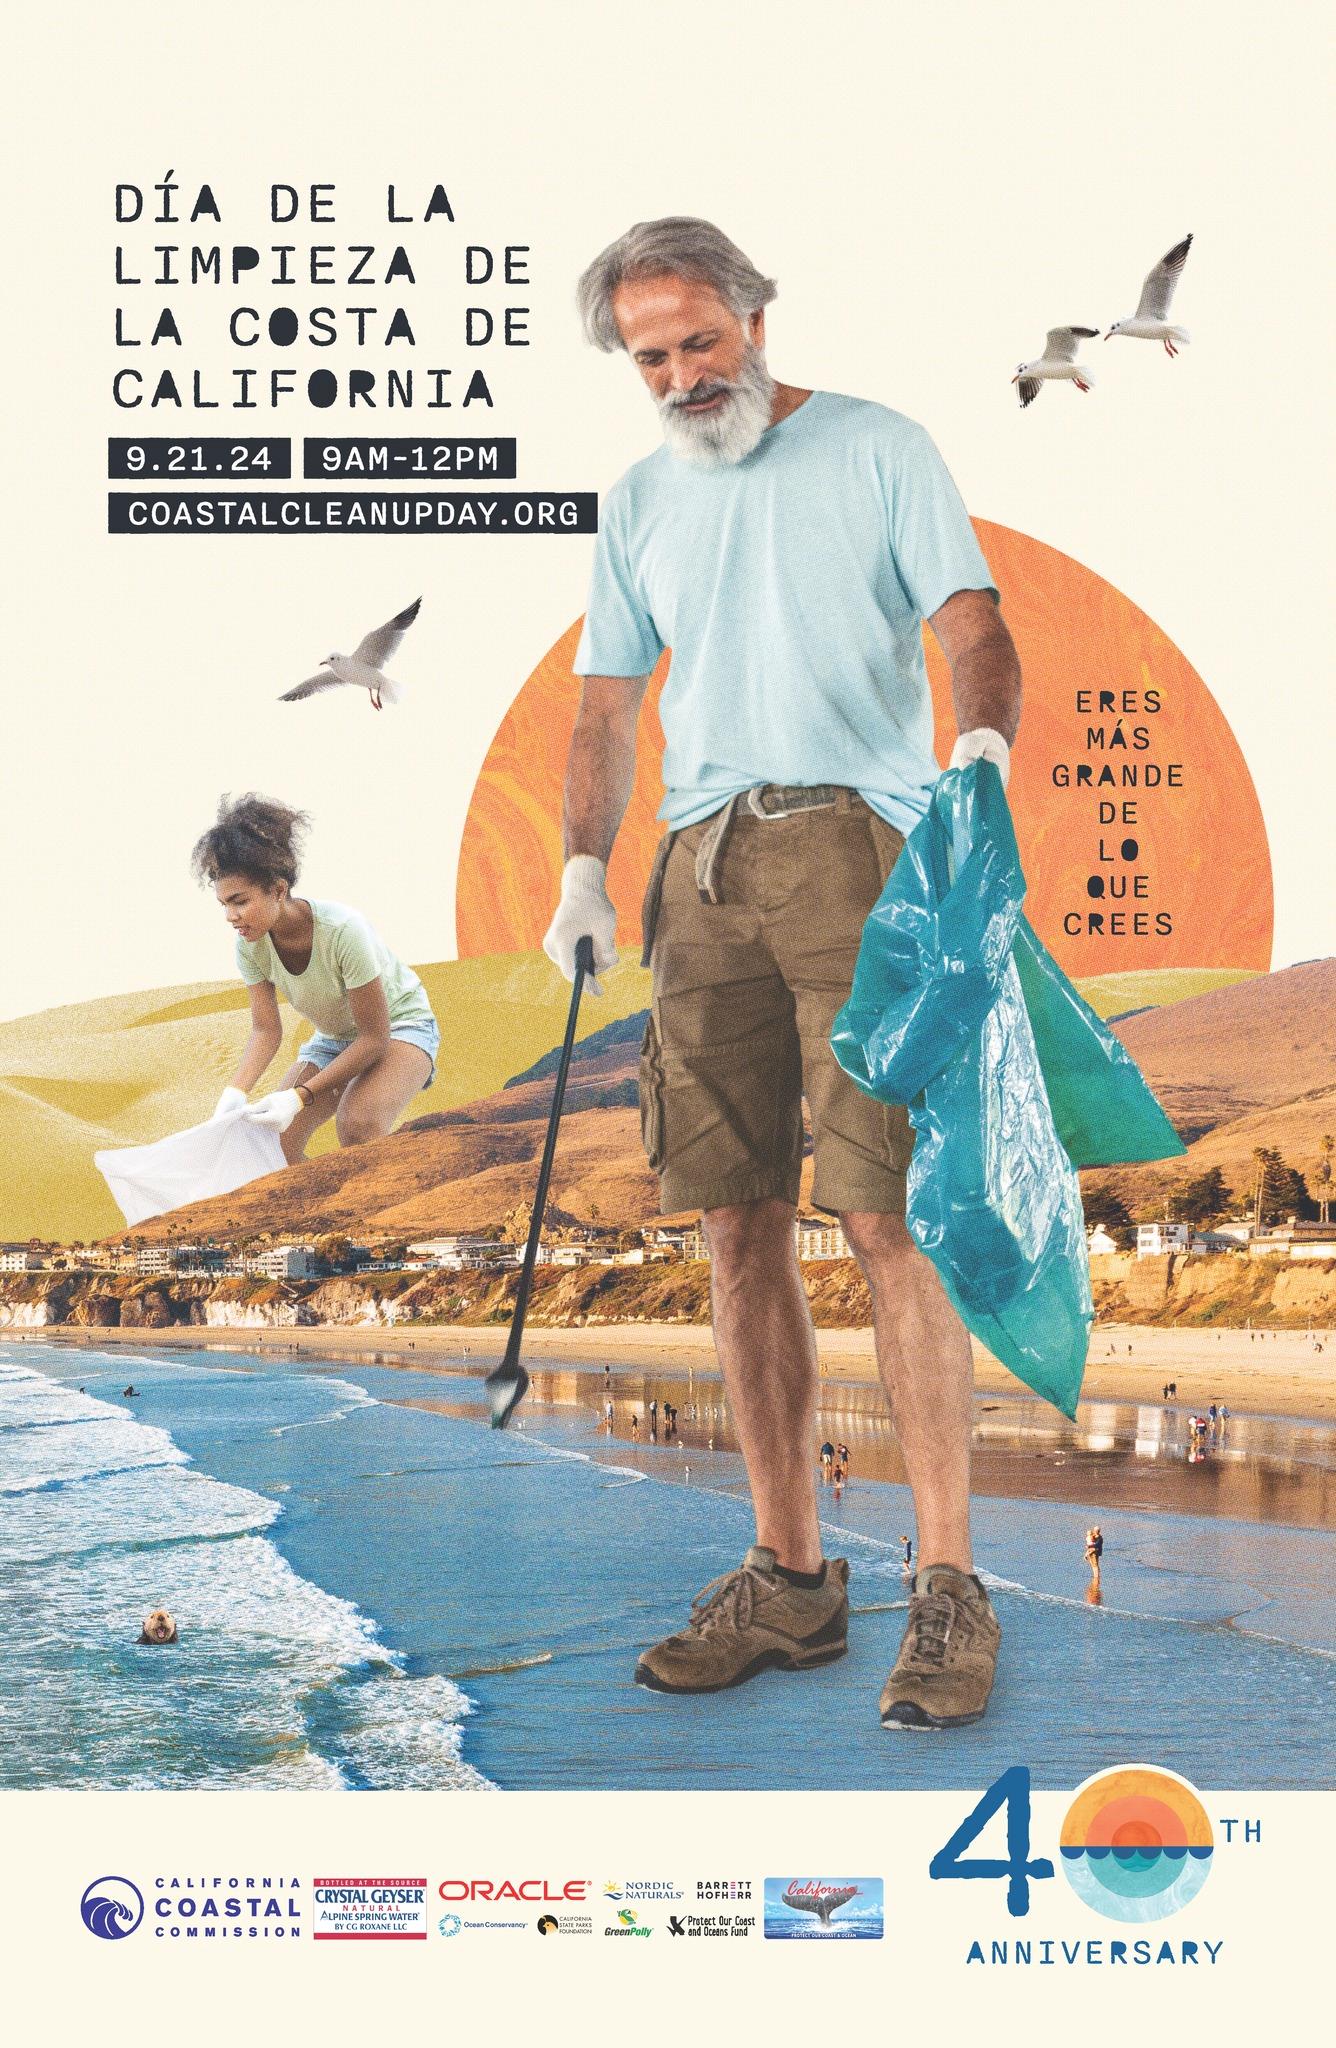 California Coastal Cleanup Day poster image. Shows 'giant' people picking up trash along the central California coast.